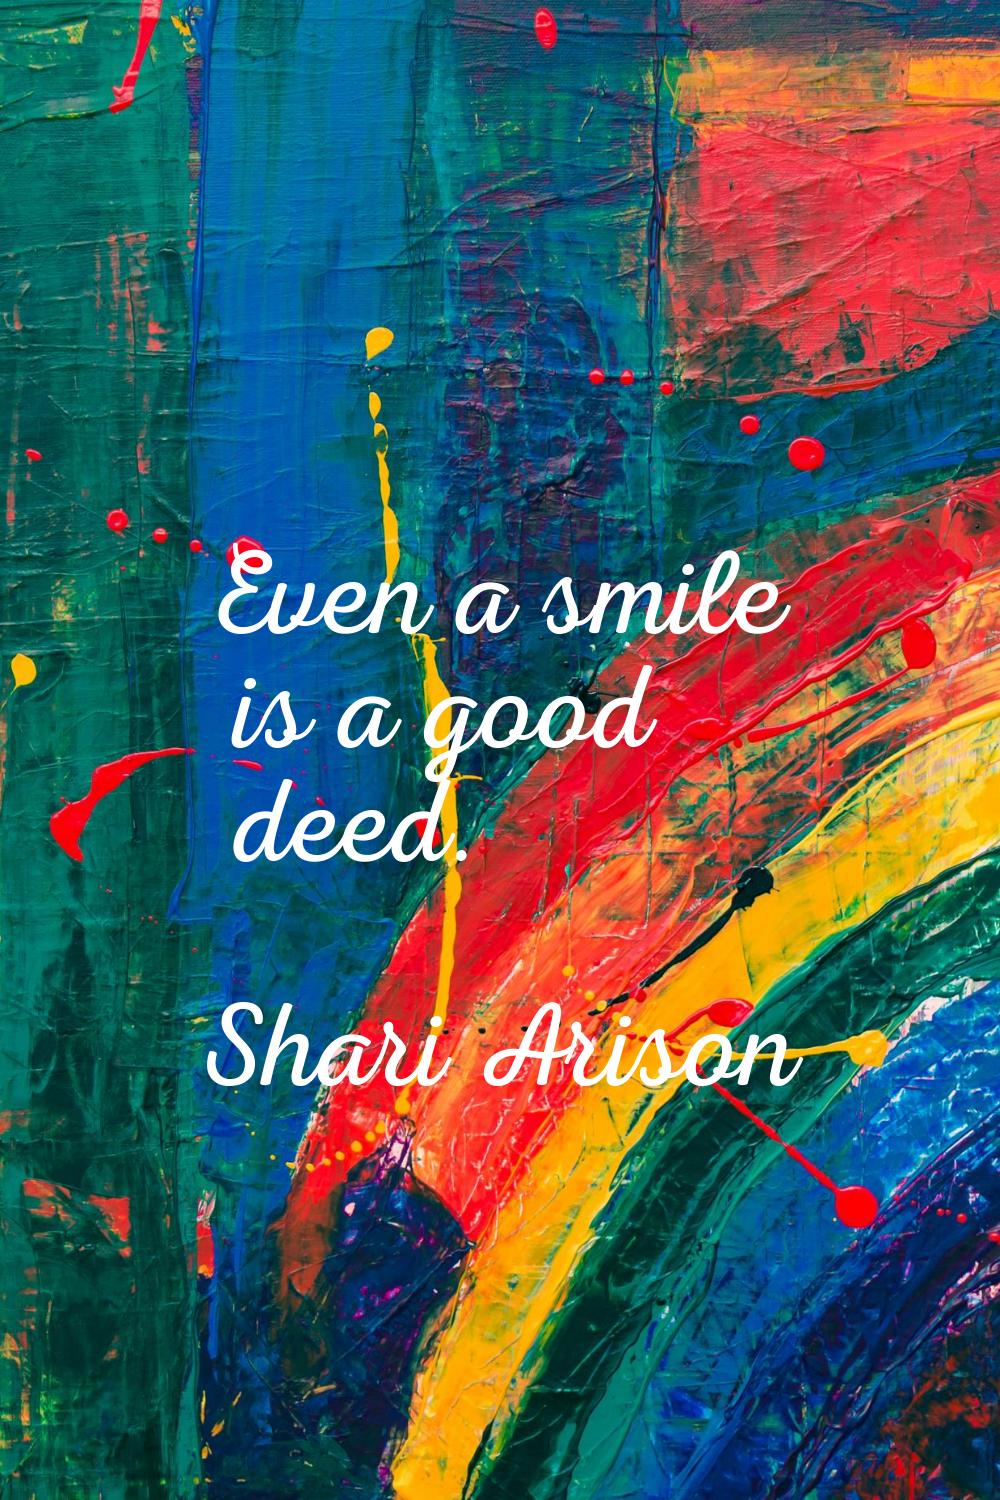 Even a smile is a good deed.